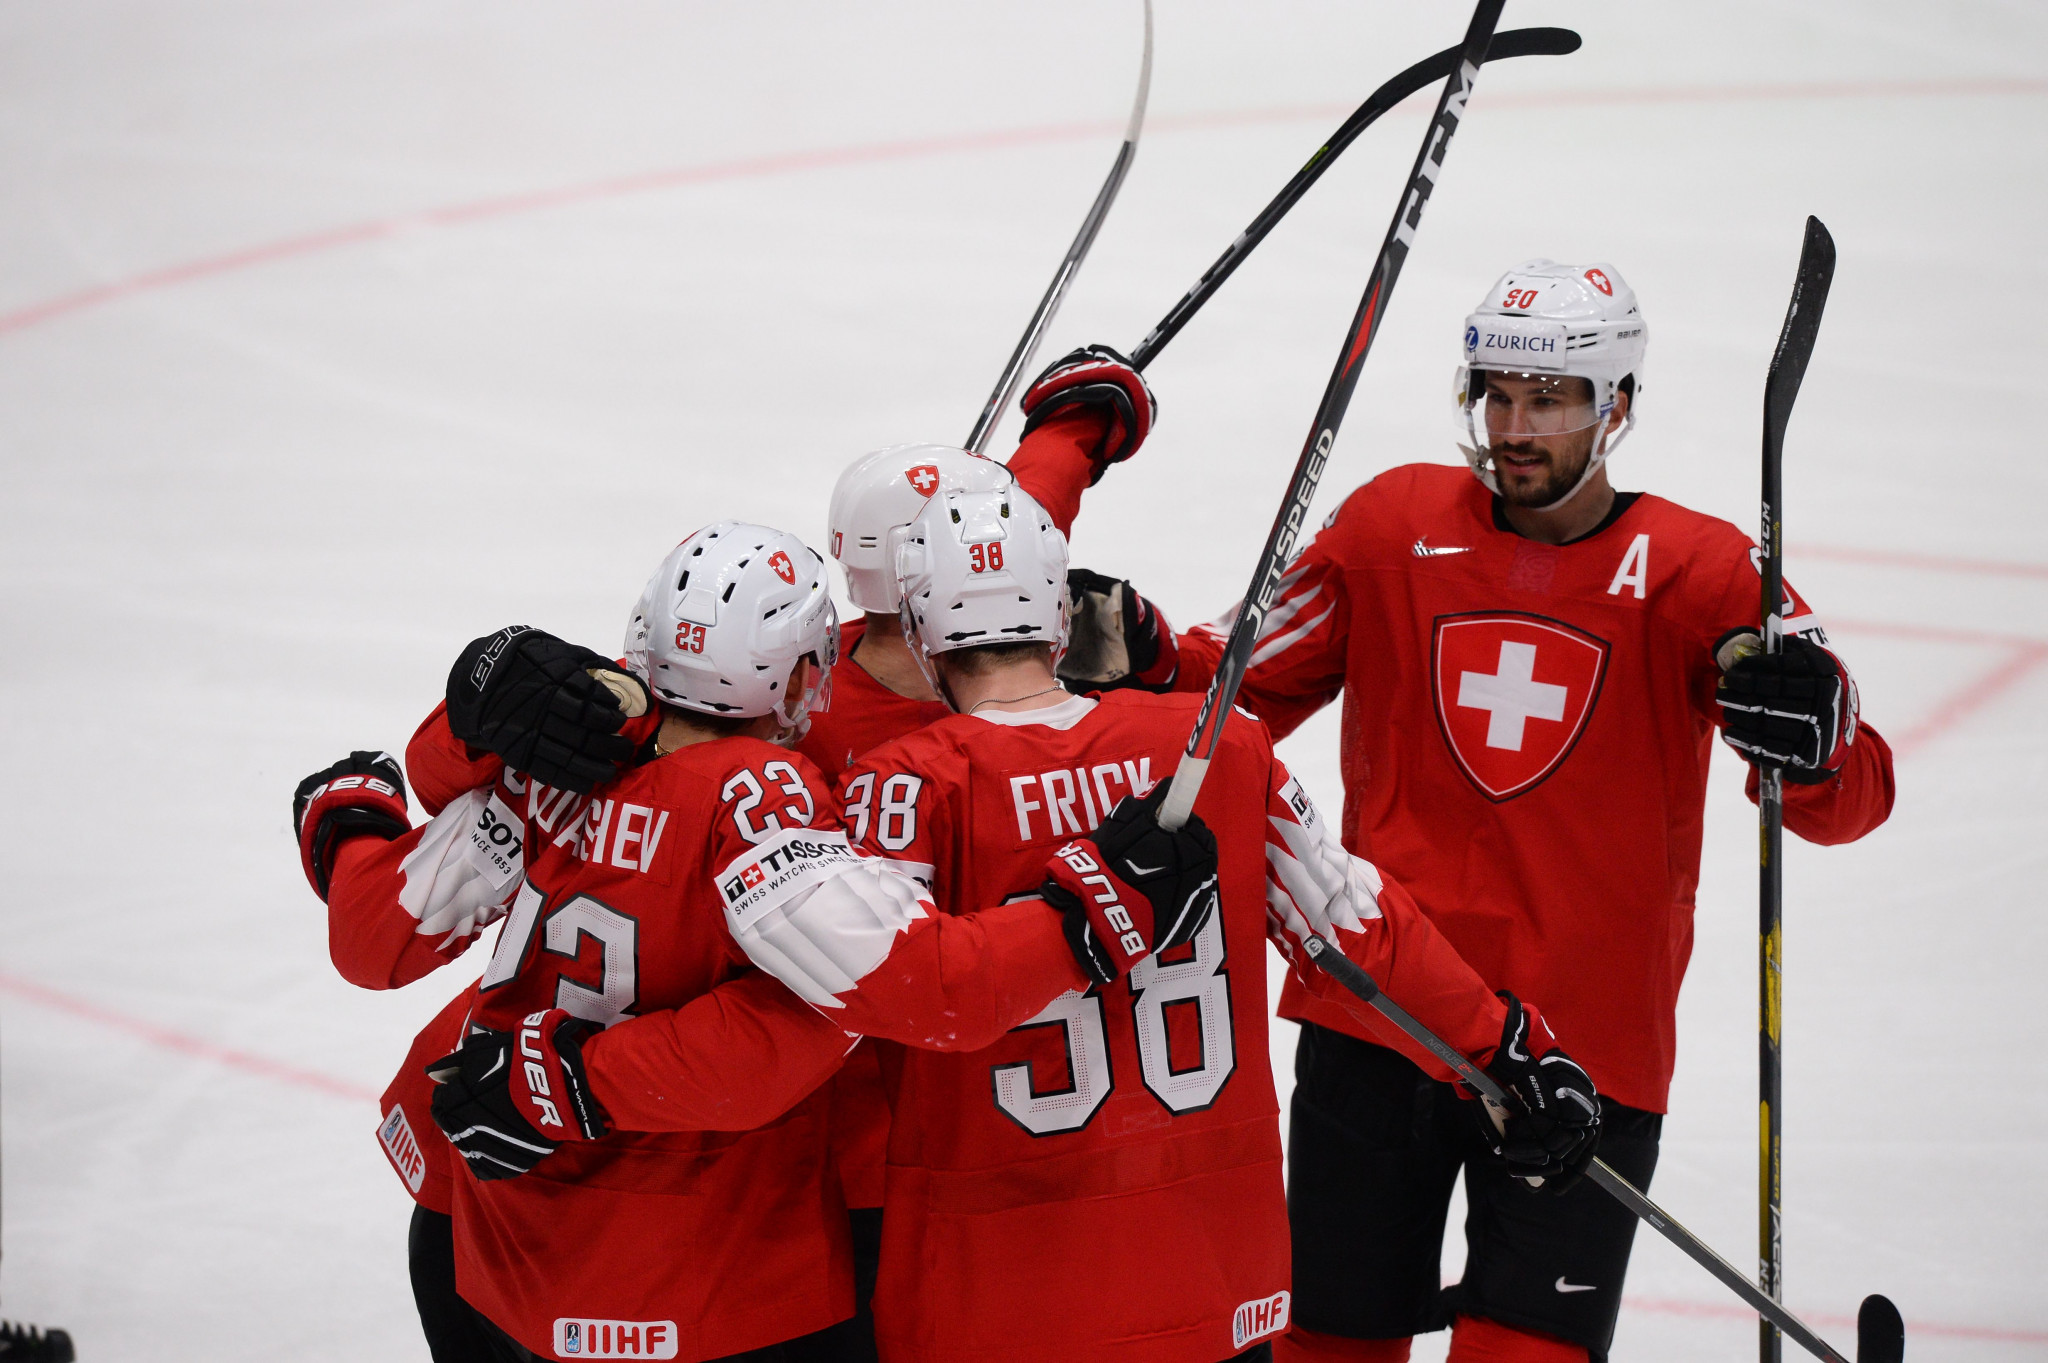 Both Swiss ice hockey teams have already qualified for Beijing 2022 ©Getty Images